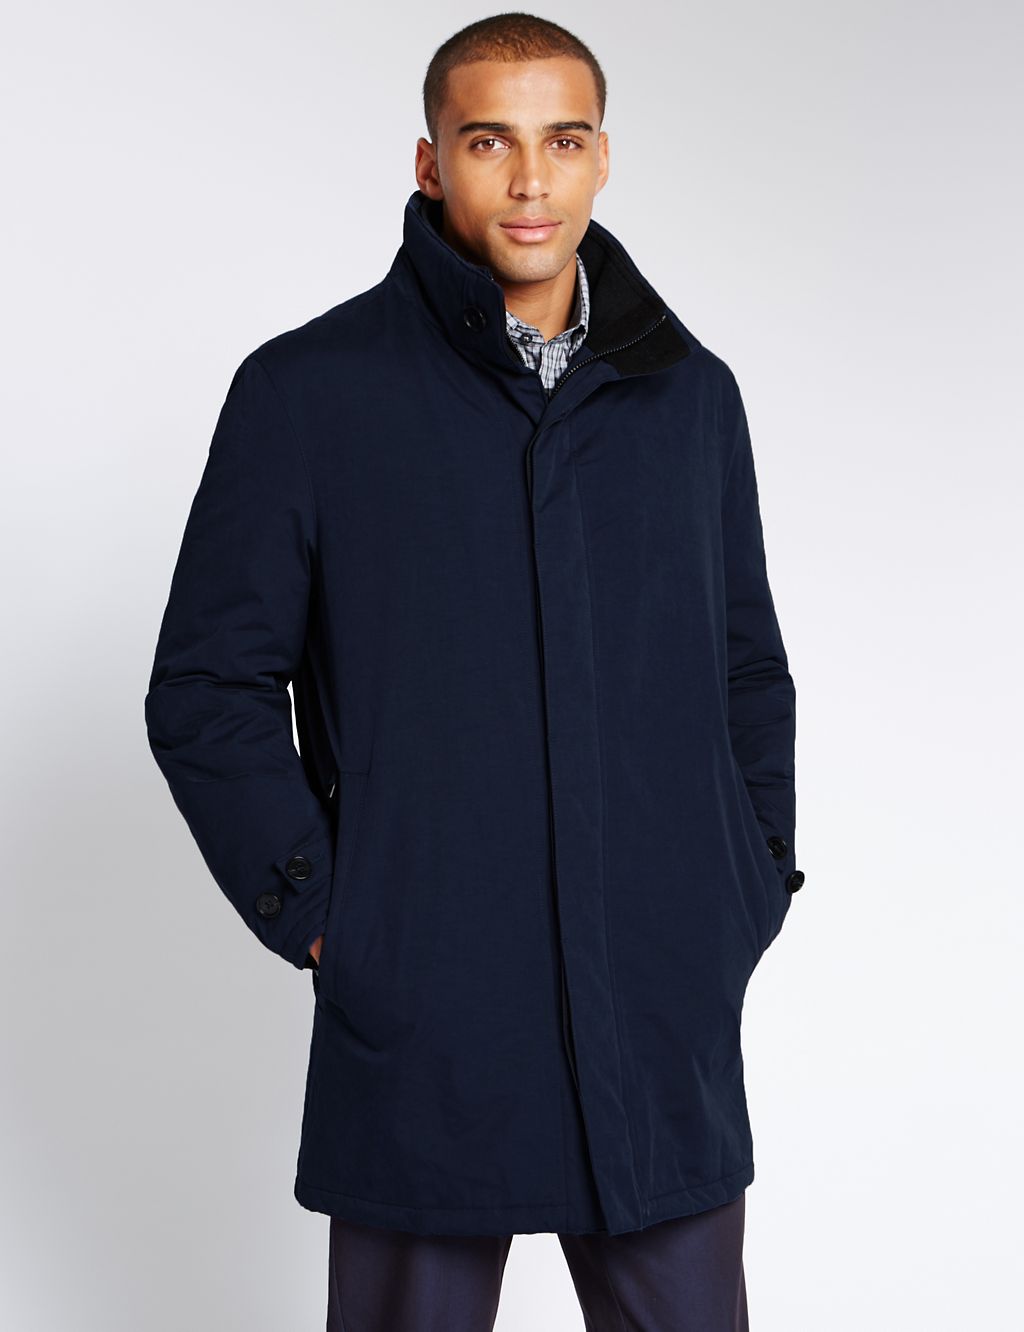 Cotton Blend Jacket with Stormwear™ 3 of 4